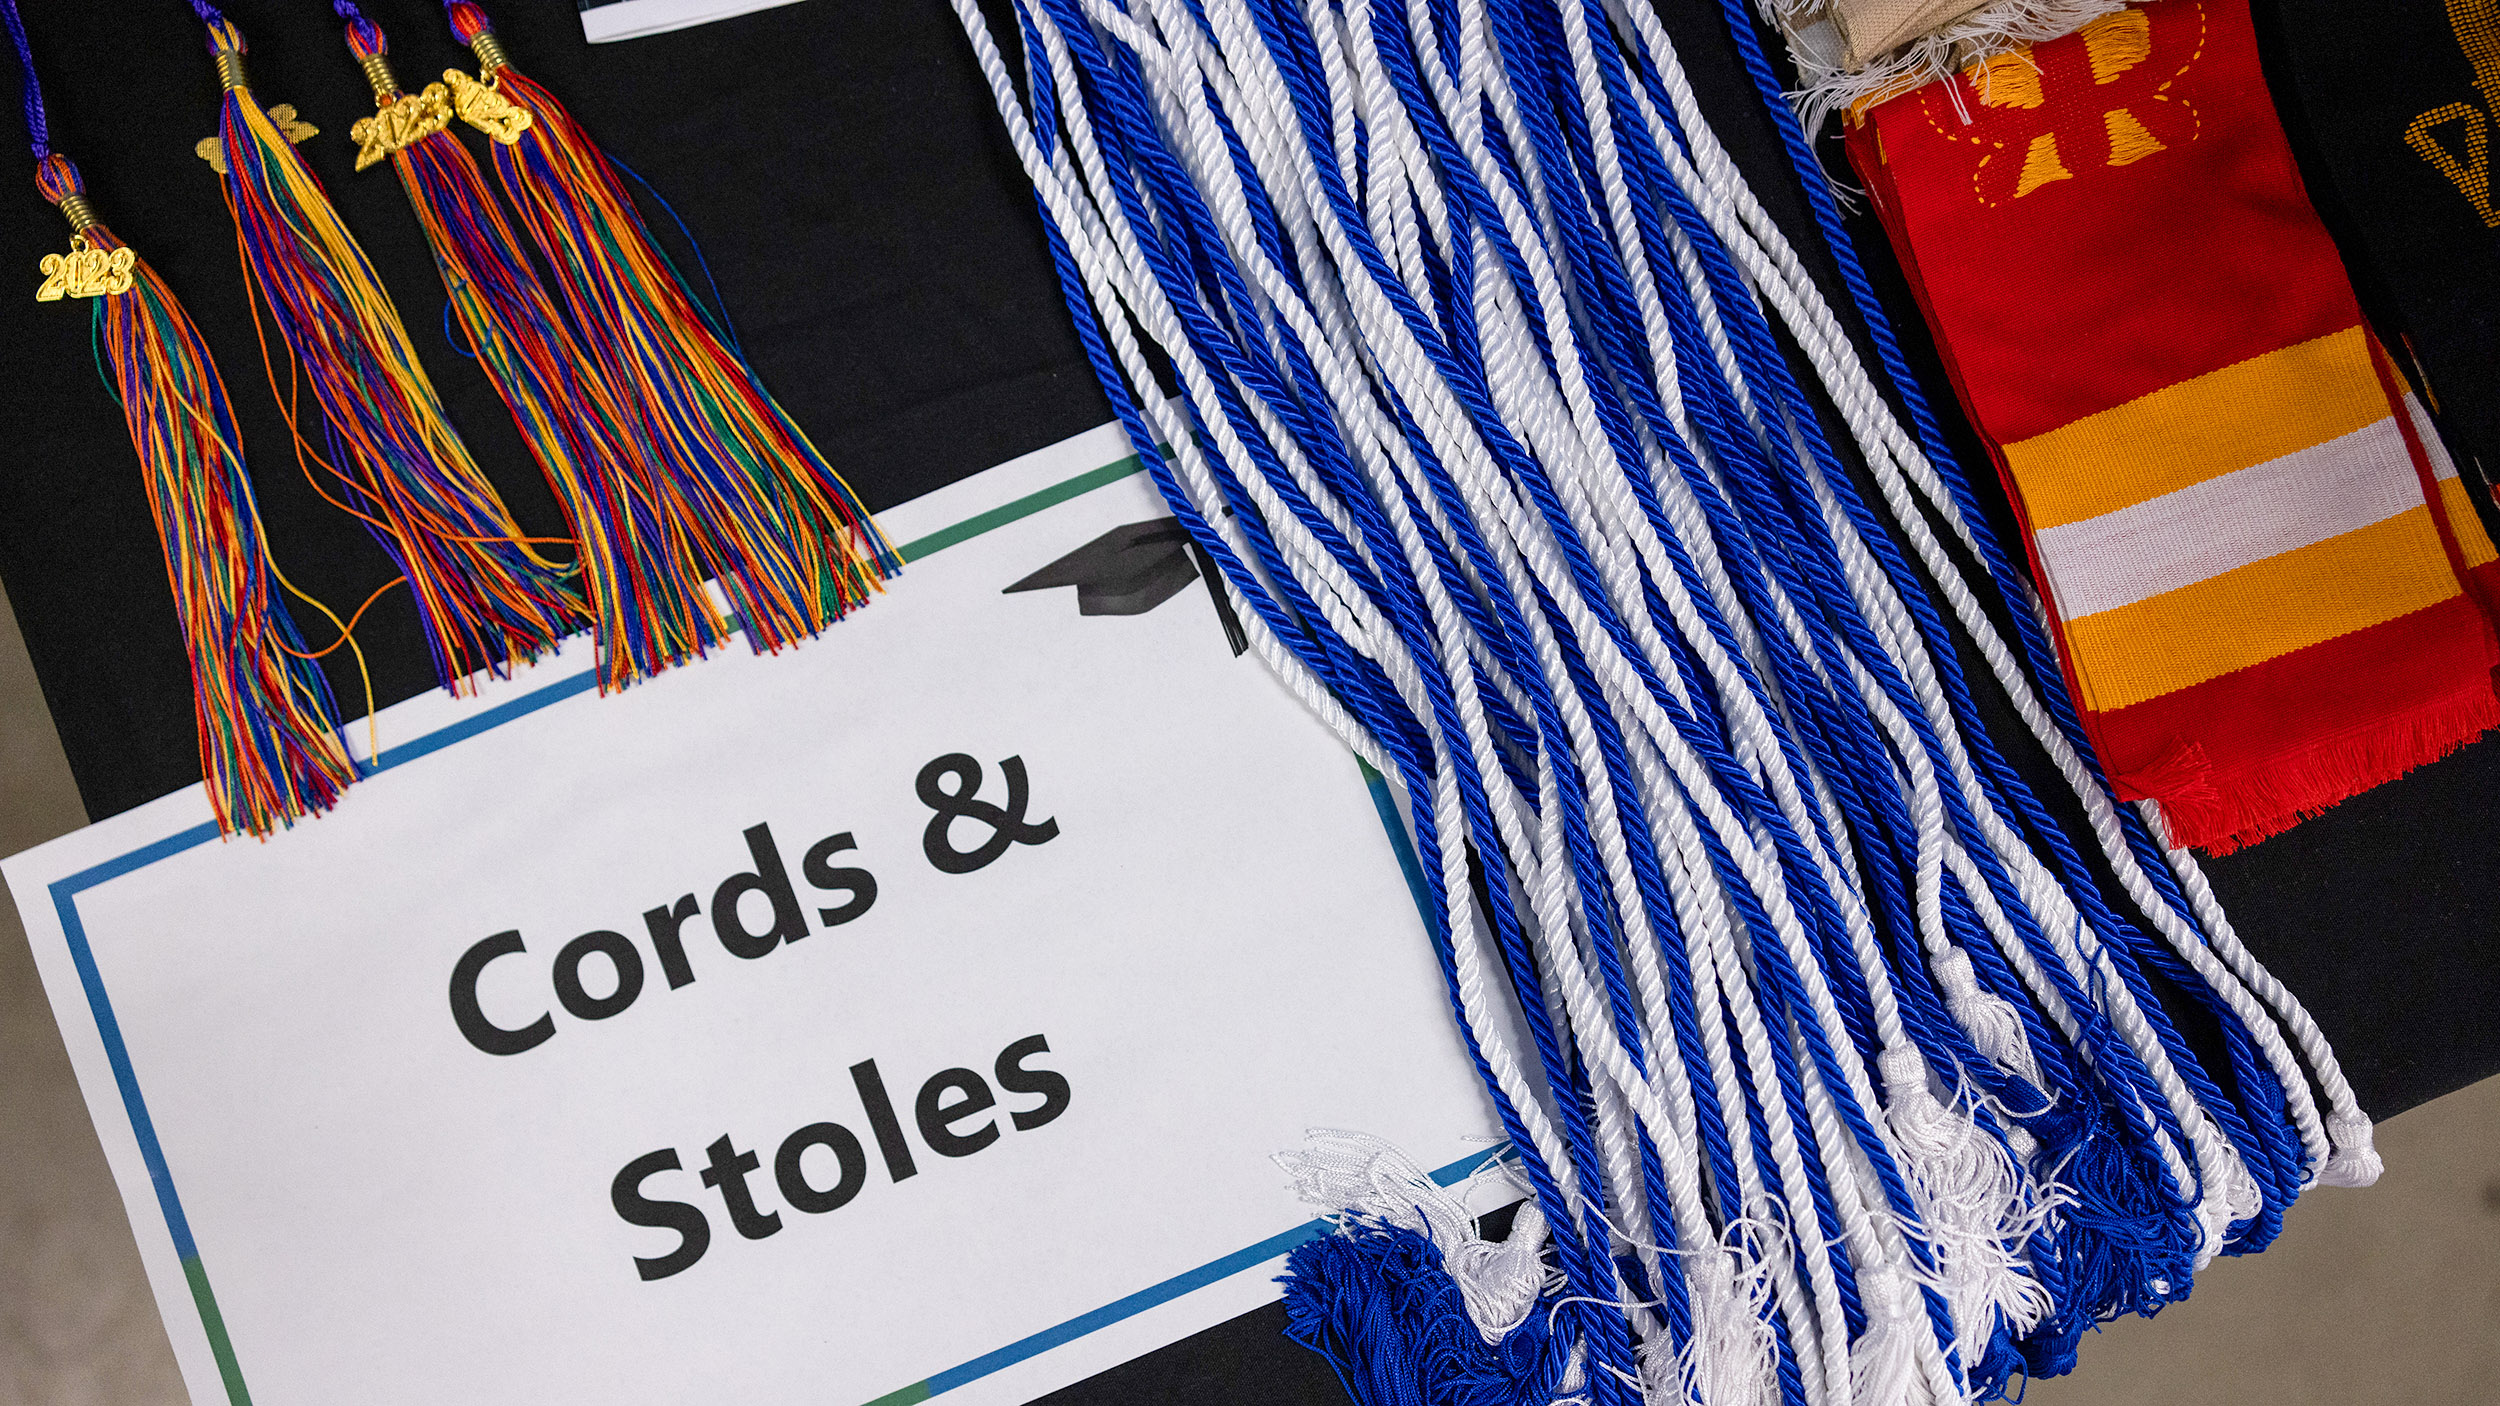 a display of various cords & stoles for commencement